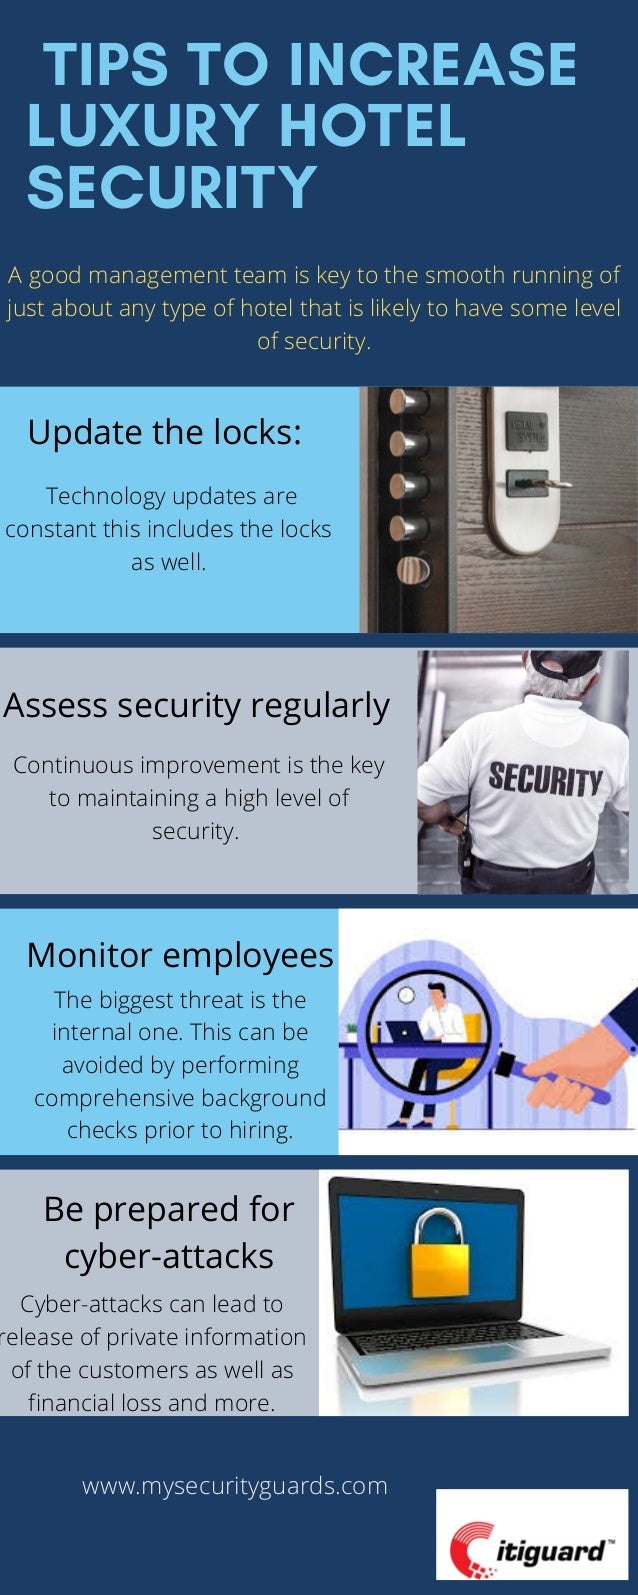 TIPS TO INCREASE
LUXURY HOTEL
SECURITY






A good management team is key to the smooth running of
just about any type of hotel that is likely to have some level
of security.
Update the locks:
Assess security regularly
Monitor employees
Be prepared for
cyber-attacks
Technology updates are
constant this includes the locks
as well.
Continuous improvement is the key
to maintaining a high level of
security.
The biggest threat is the
internal one. This can be
avoided by performing
comprehensive background
checks prior to hiring.
Cyber-attacks can lead to
release of private information
of the customers as well as
financial loss and more.
www.mysecurityguards.com


 